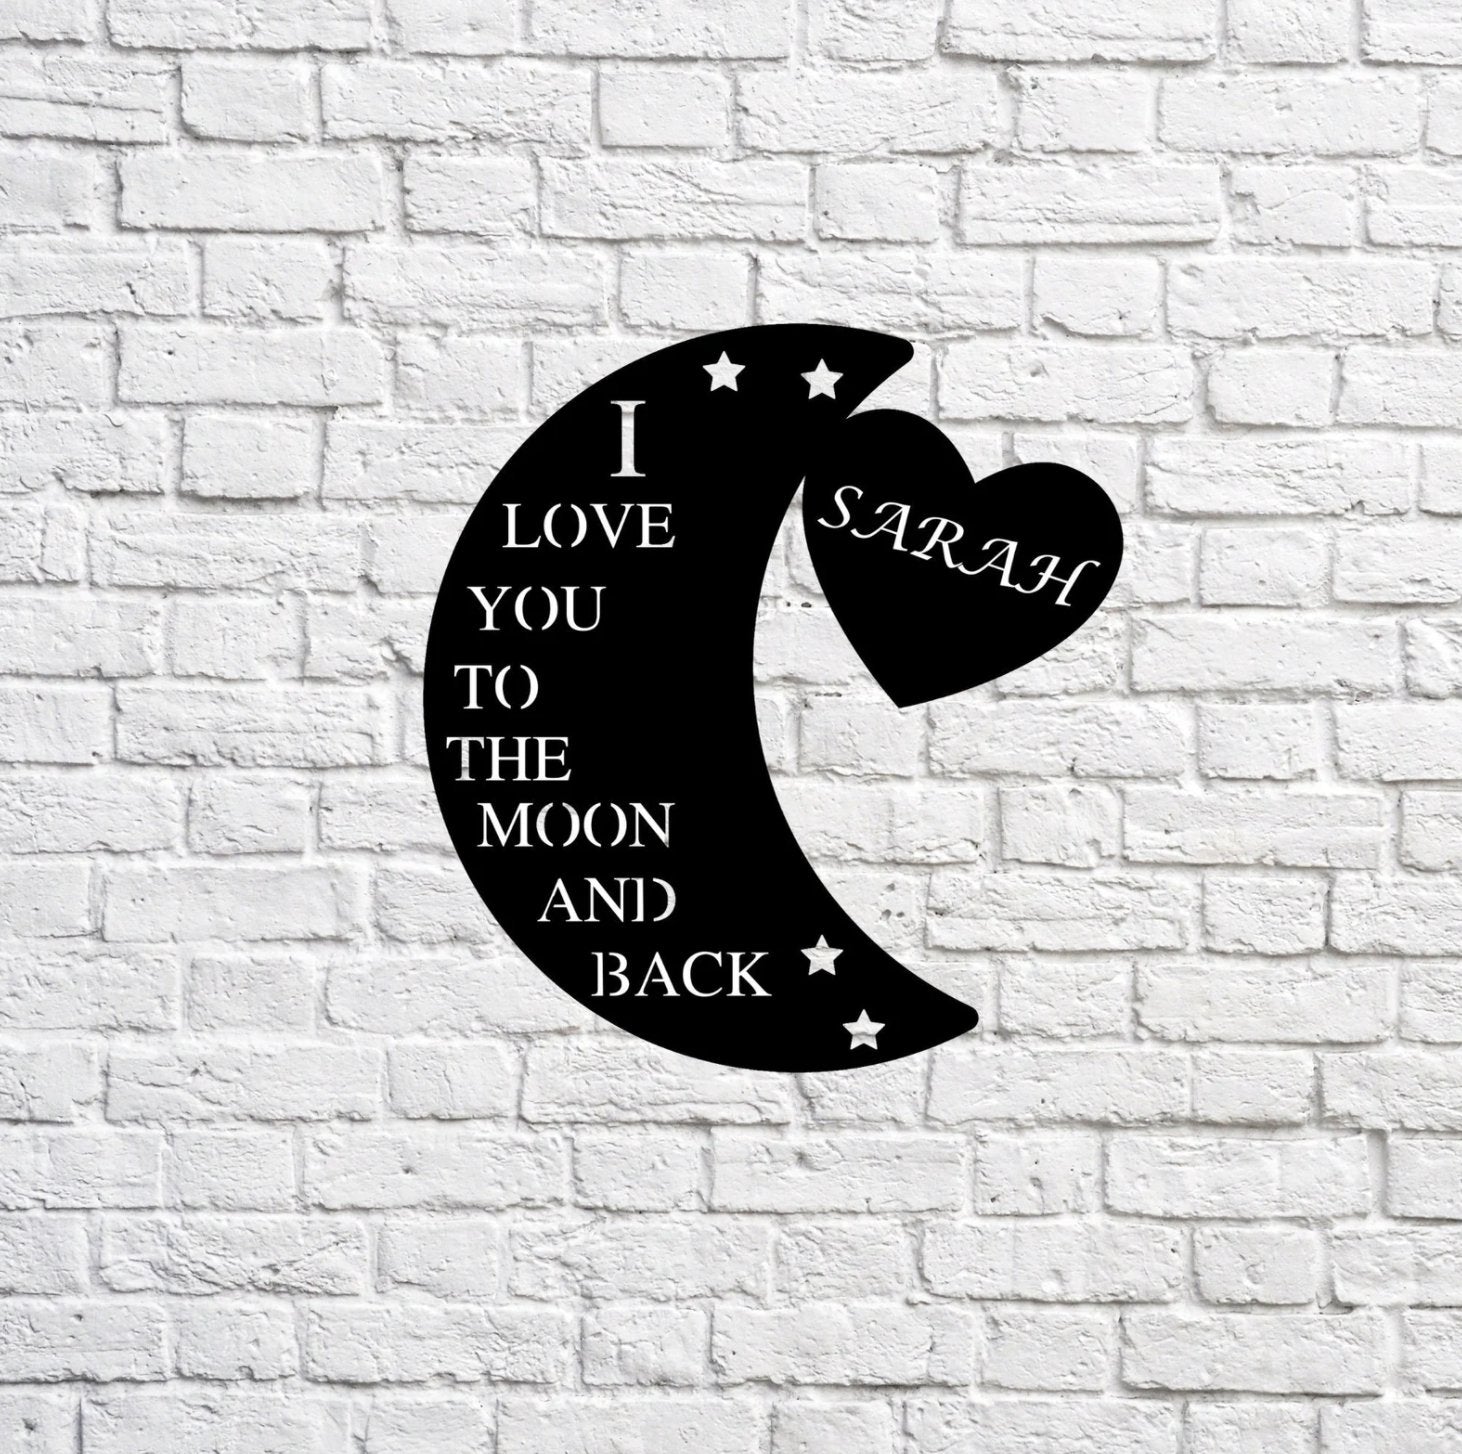 Pub Signs To The Moon And Back Sign